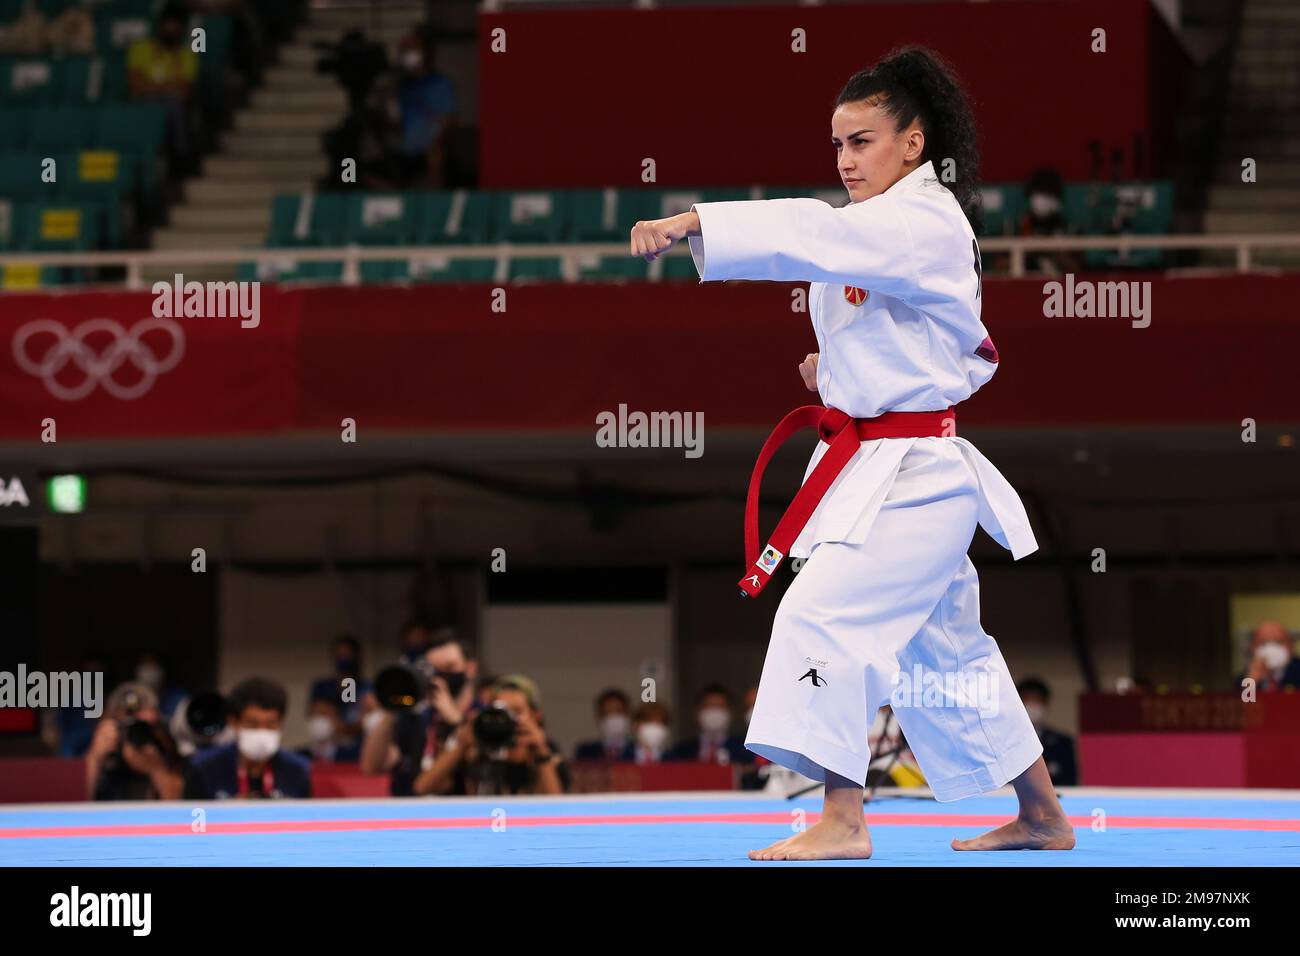 AUG 5, 2021 - TOKYO, JAPAN: Puliksenija JOVANOSKA of Macedonia competes in the Women's Kata Elimination Round at the Tokyo 2020 Olympic Games (Photo by Mickael Chavet/RX) Stock Photo